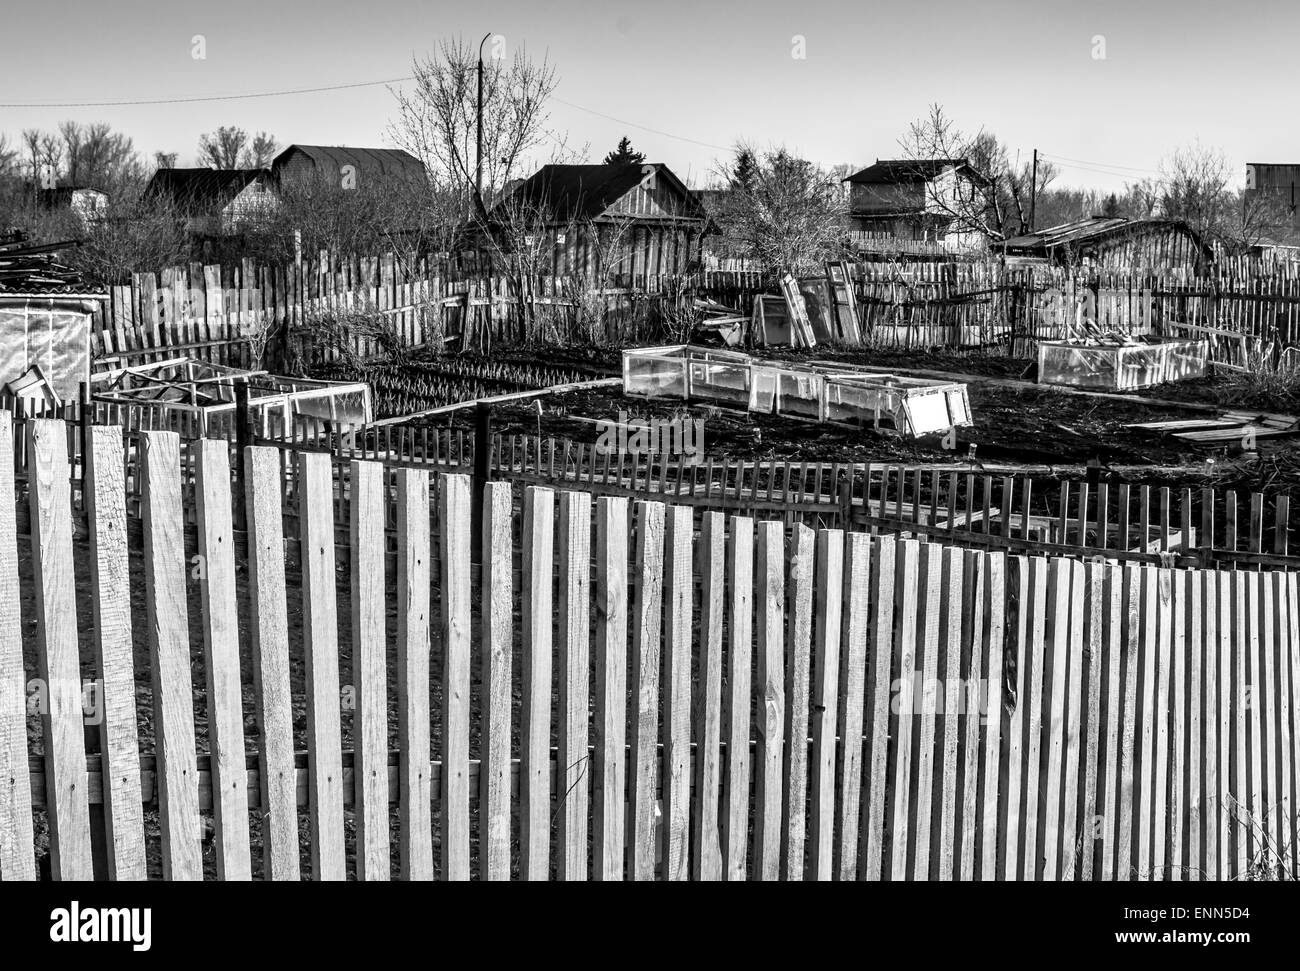 Rustic garden plots with vertical wooden slat boundary markers in black and white Stock Photo